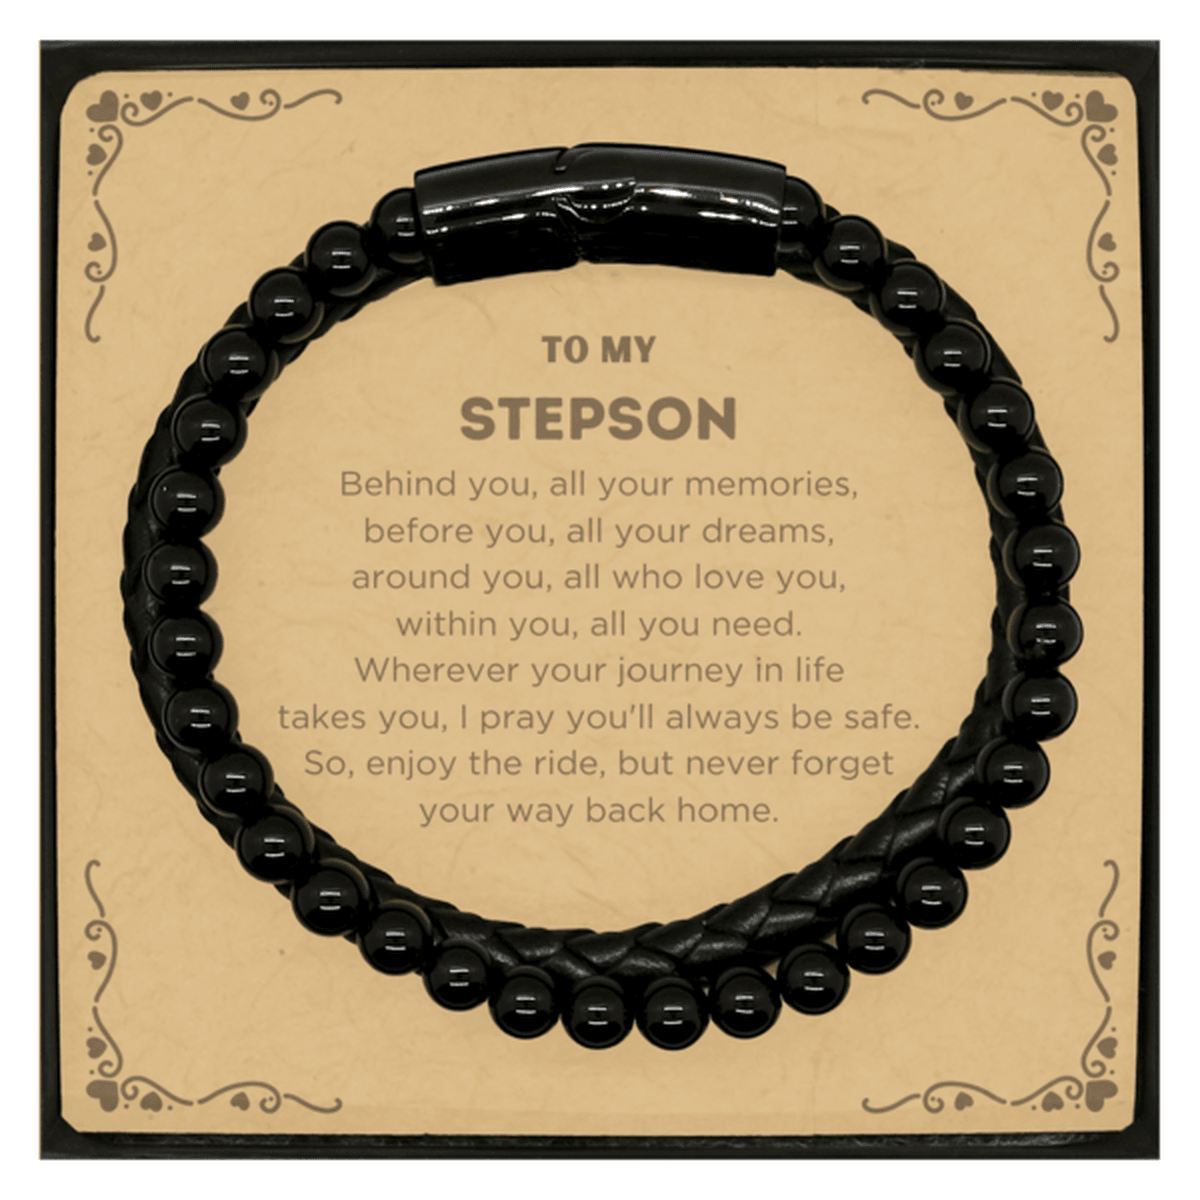 To My Stepson Gifts, Inspirational Stepson Stone Leather Bracelets, Sentimental Birthday Christmas Unique Gifts For Stepson Behind you, all your memories, before you, all your dreams, around you, all who love you, within you, all you need - Mallard Moon Gift Shop